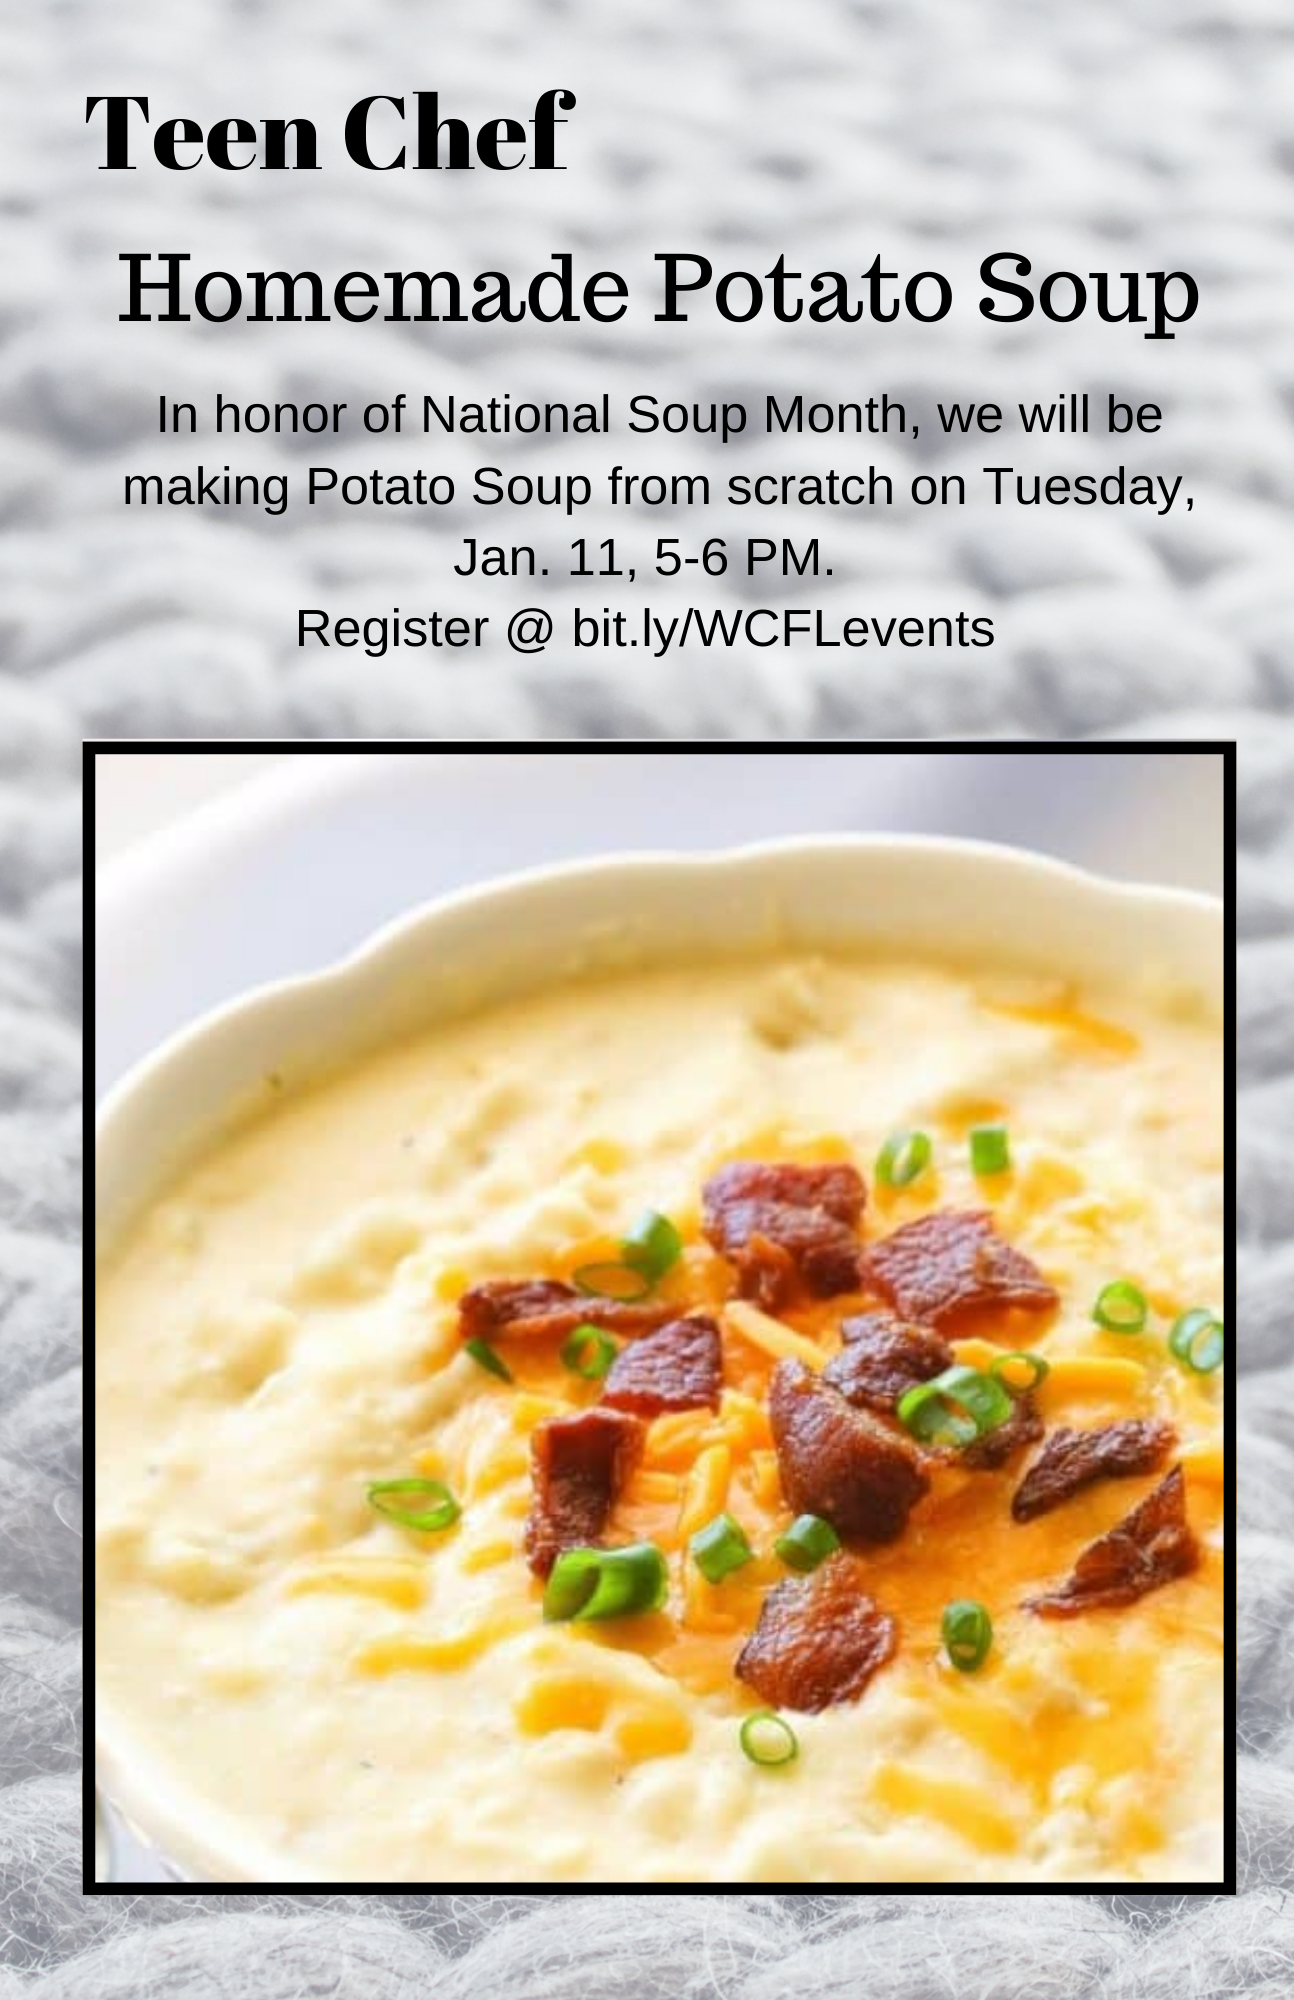 In honor of National Soup Month, we will be making Potato Soup from scratch on Tuesday, Jan. 11, 5-6 PM. 